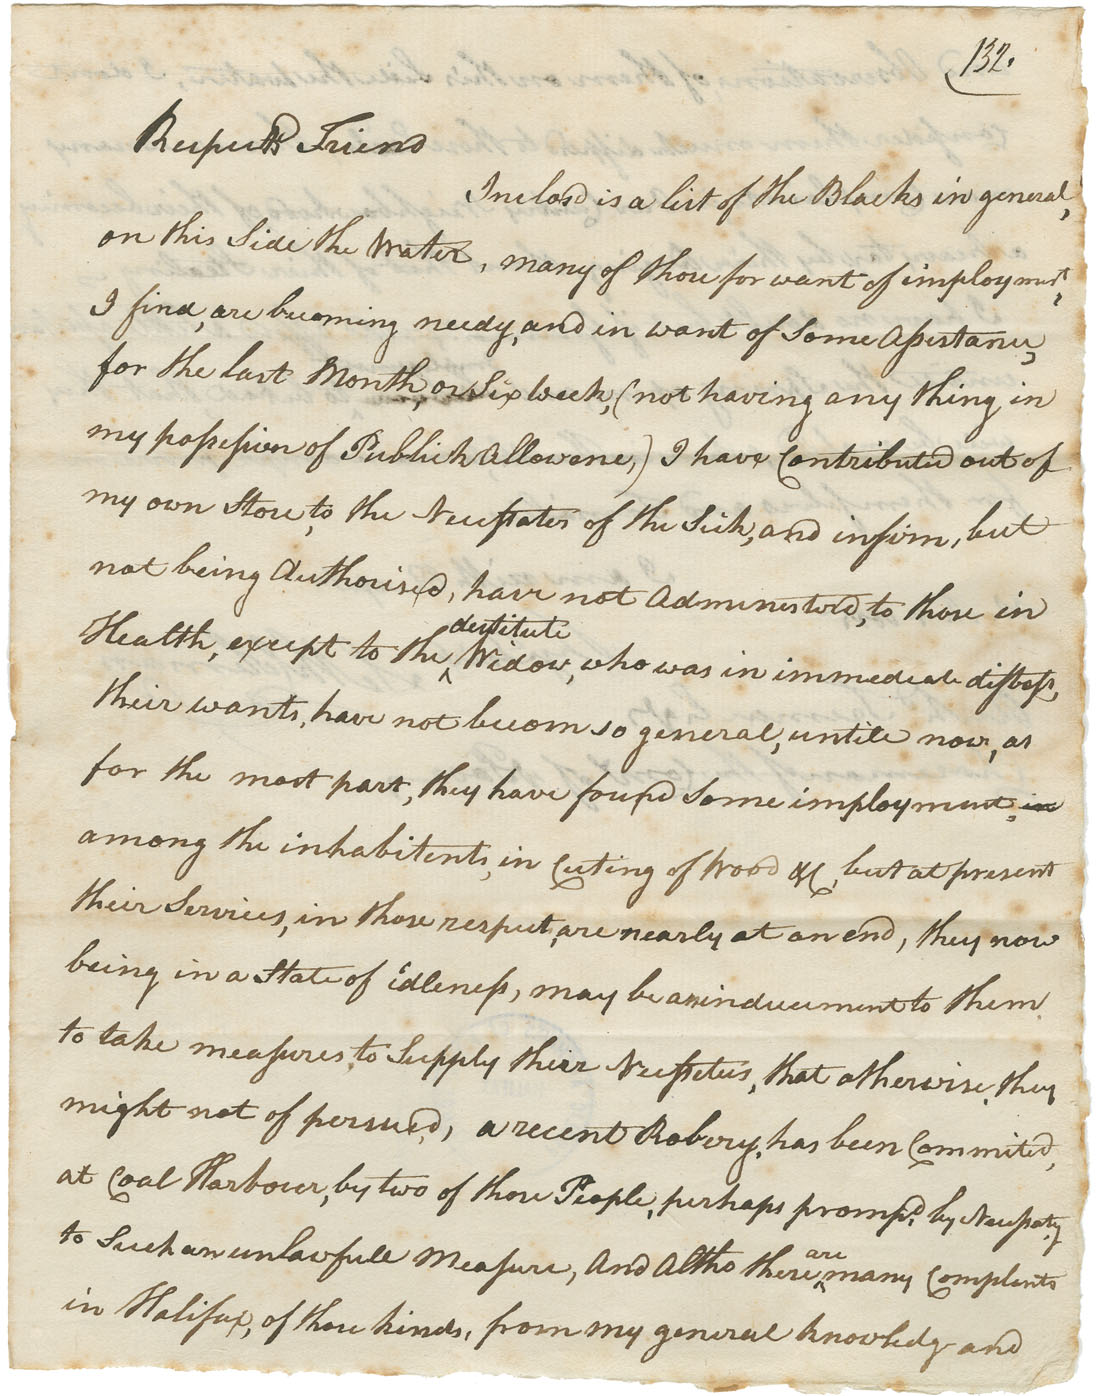 Letter from Seth Coleman to Richard Tremain, Chairman of Commissioners of the Poor, on the condition of the Black Refugees at Preston and Dartmouth